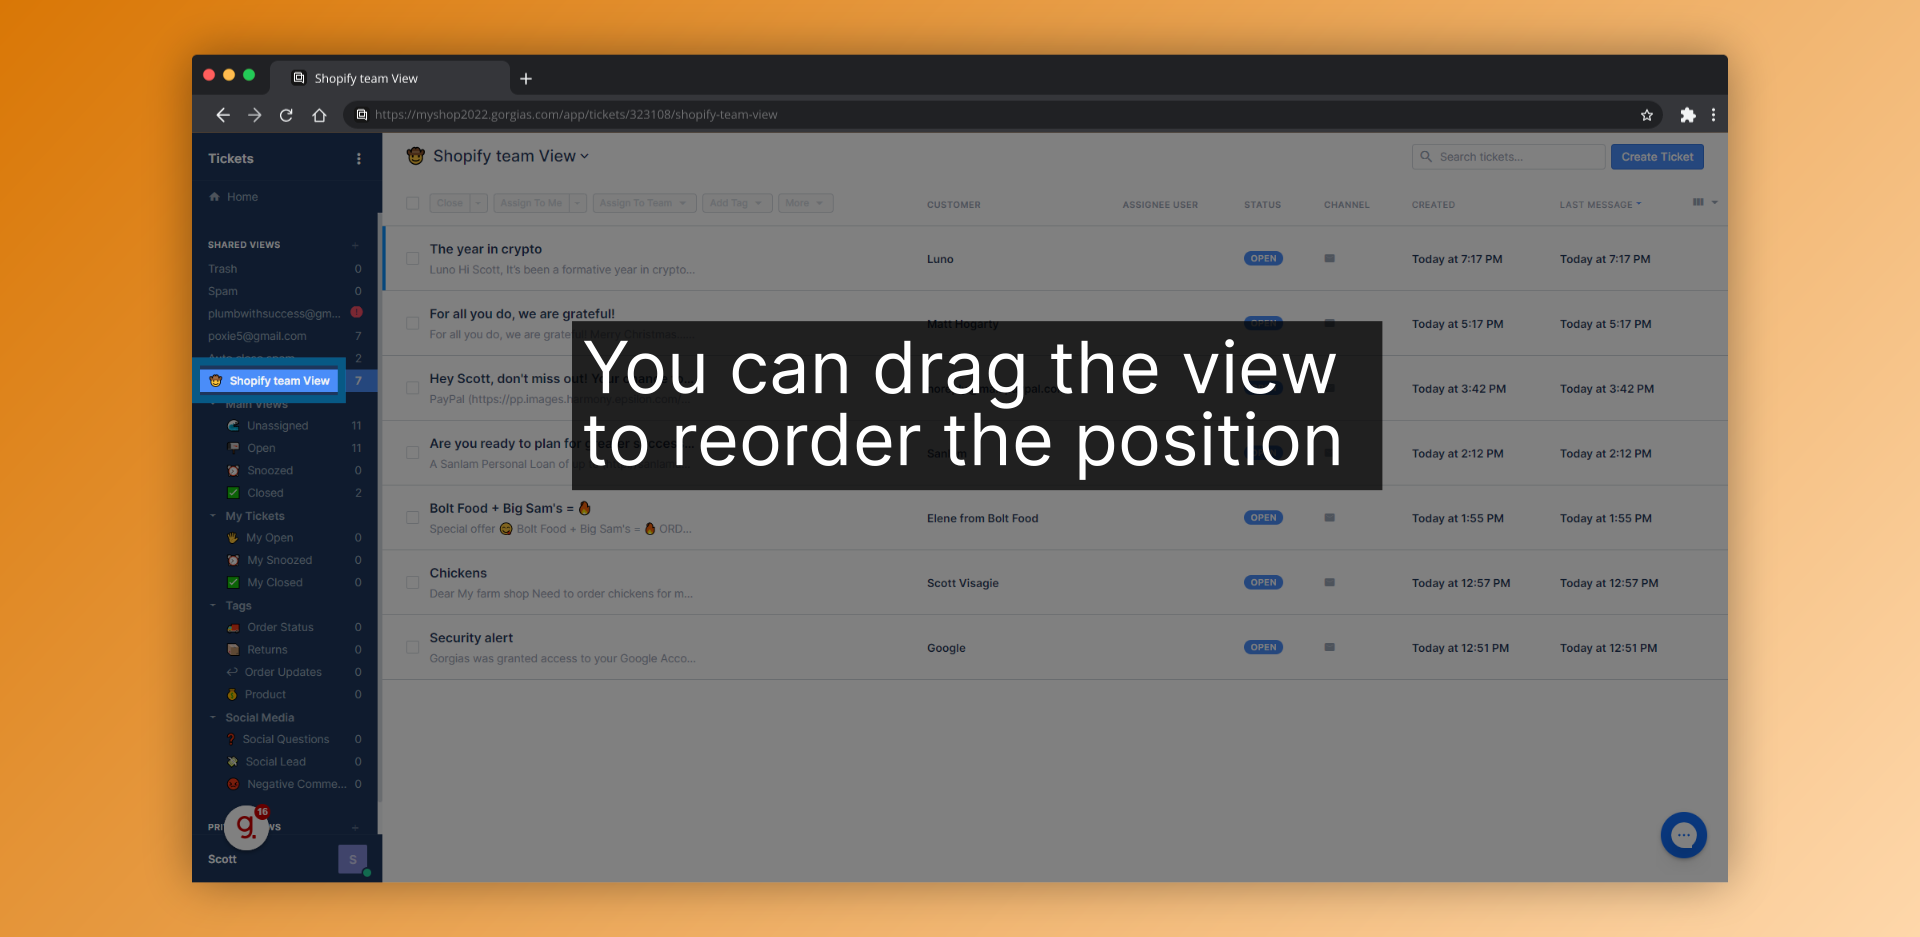 You can drag the view to reorder the position